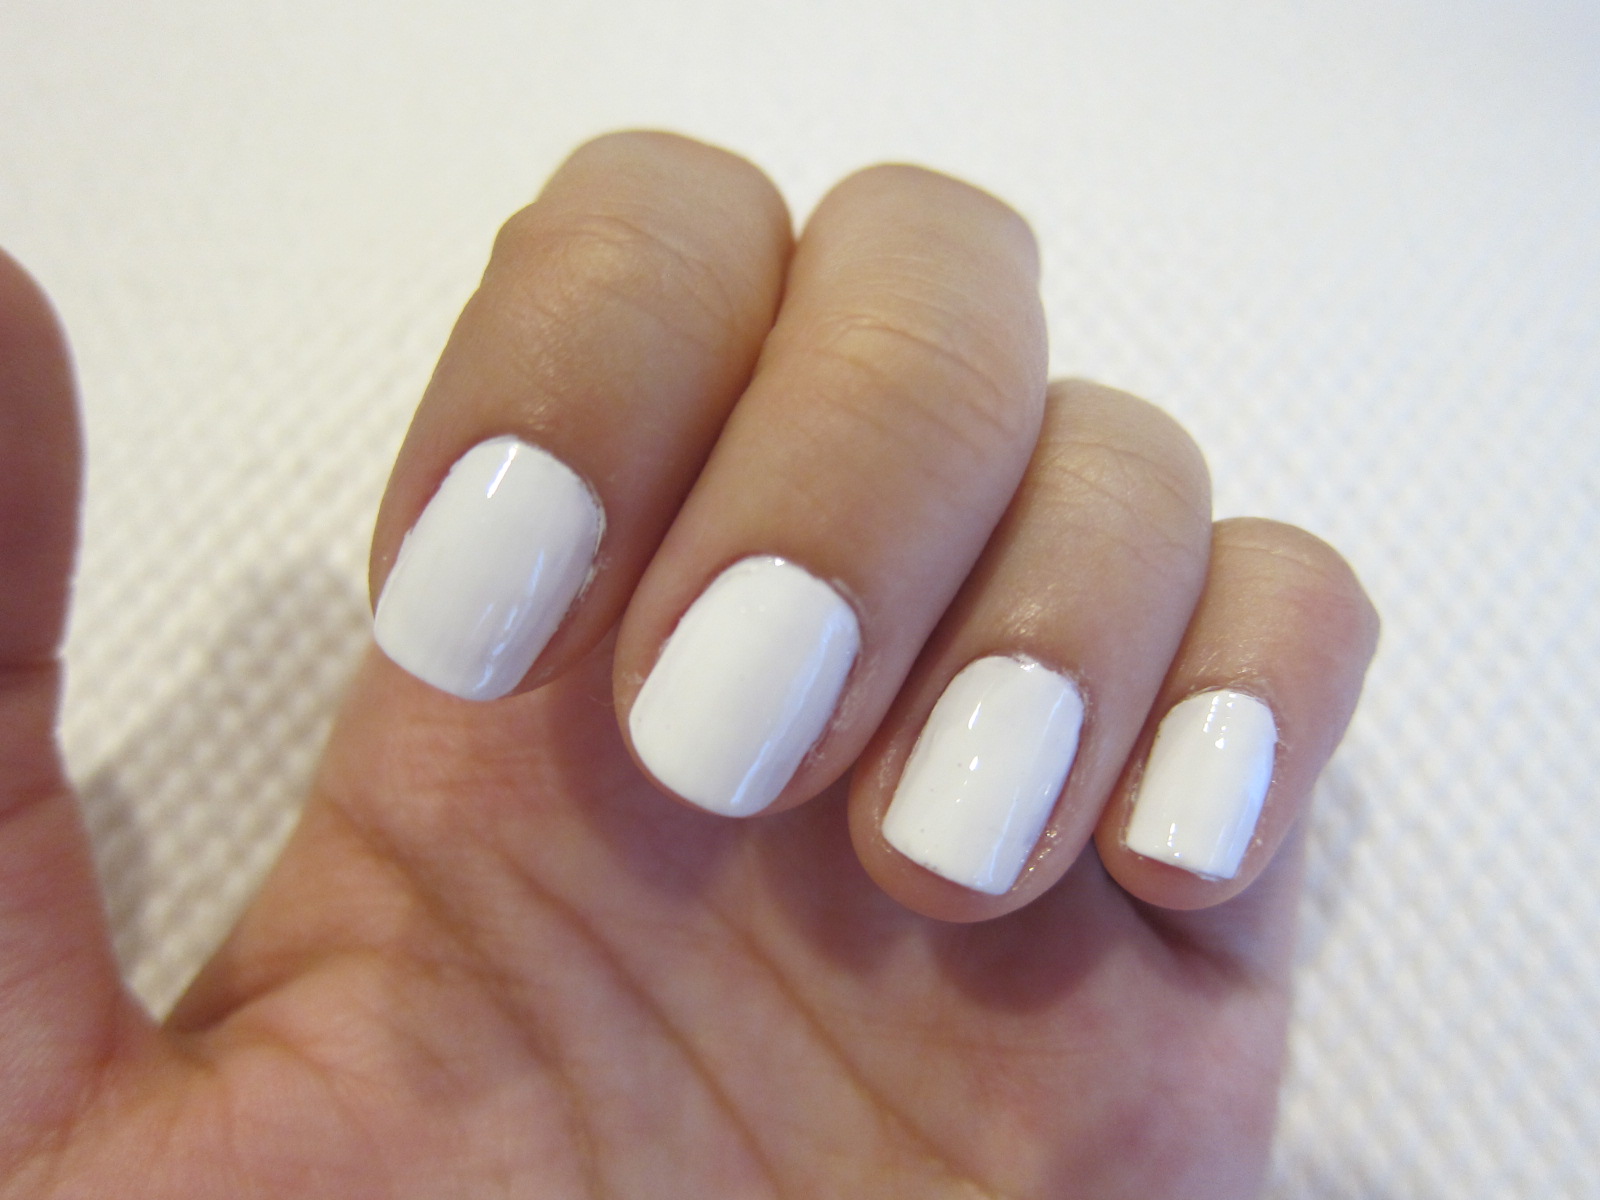 6. Orly Nail Lacquer in "White Tips" - wide 2